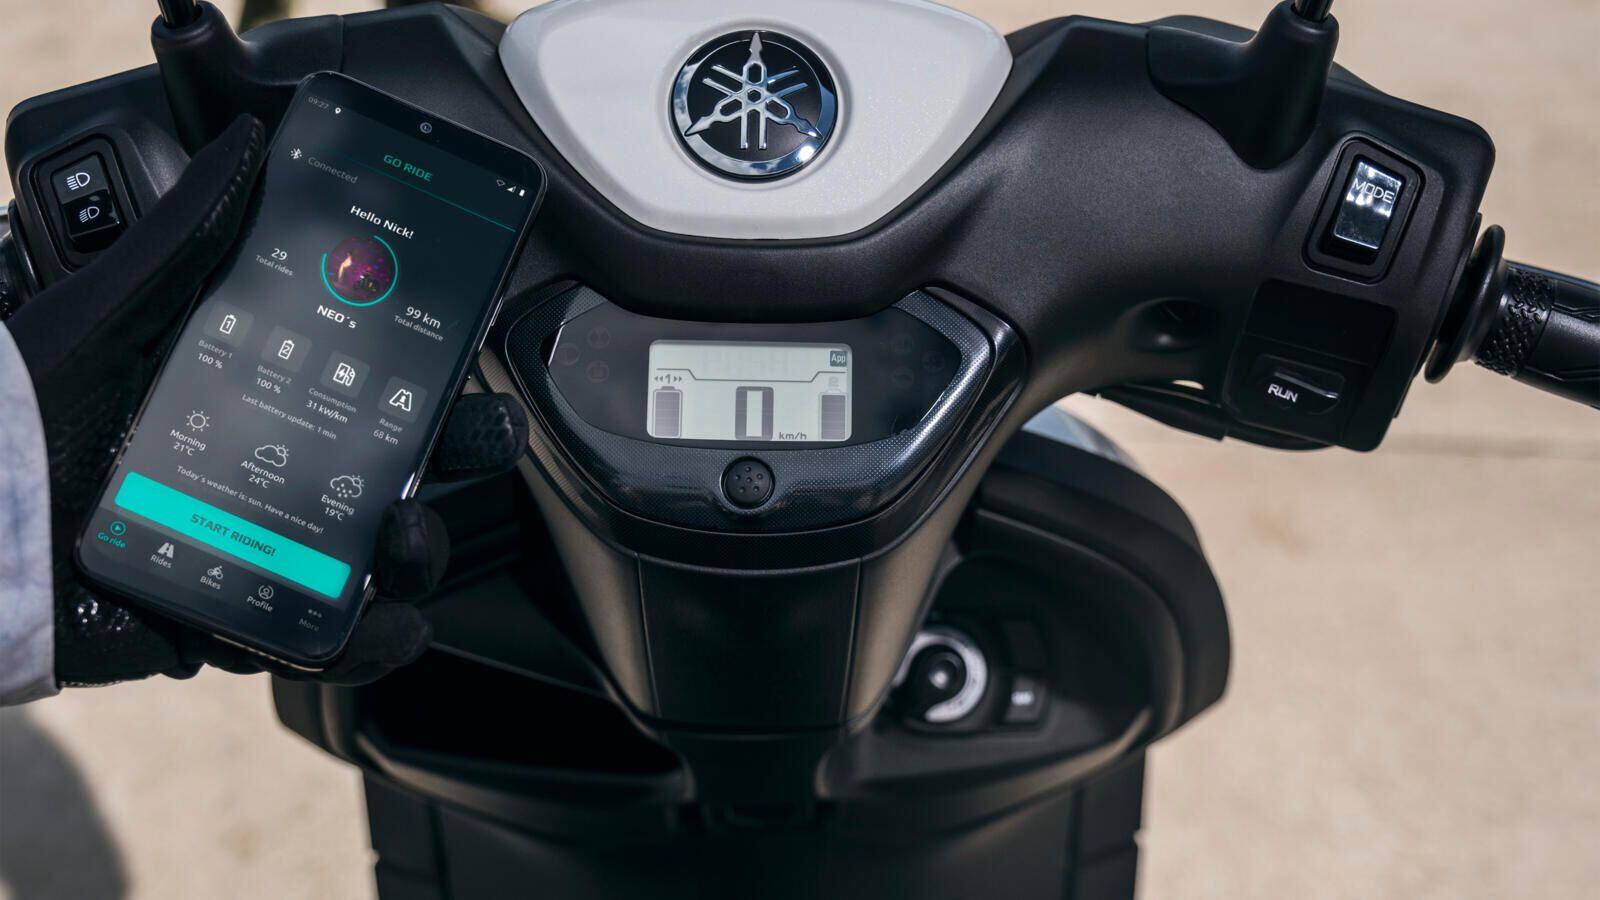 Two selectable ride modes come standard. When paired with Yamaha’s MyRide app, the dash can display additional bike info.